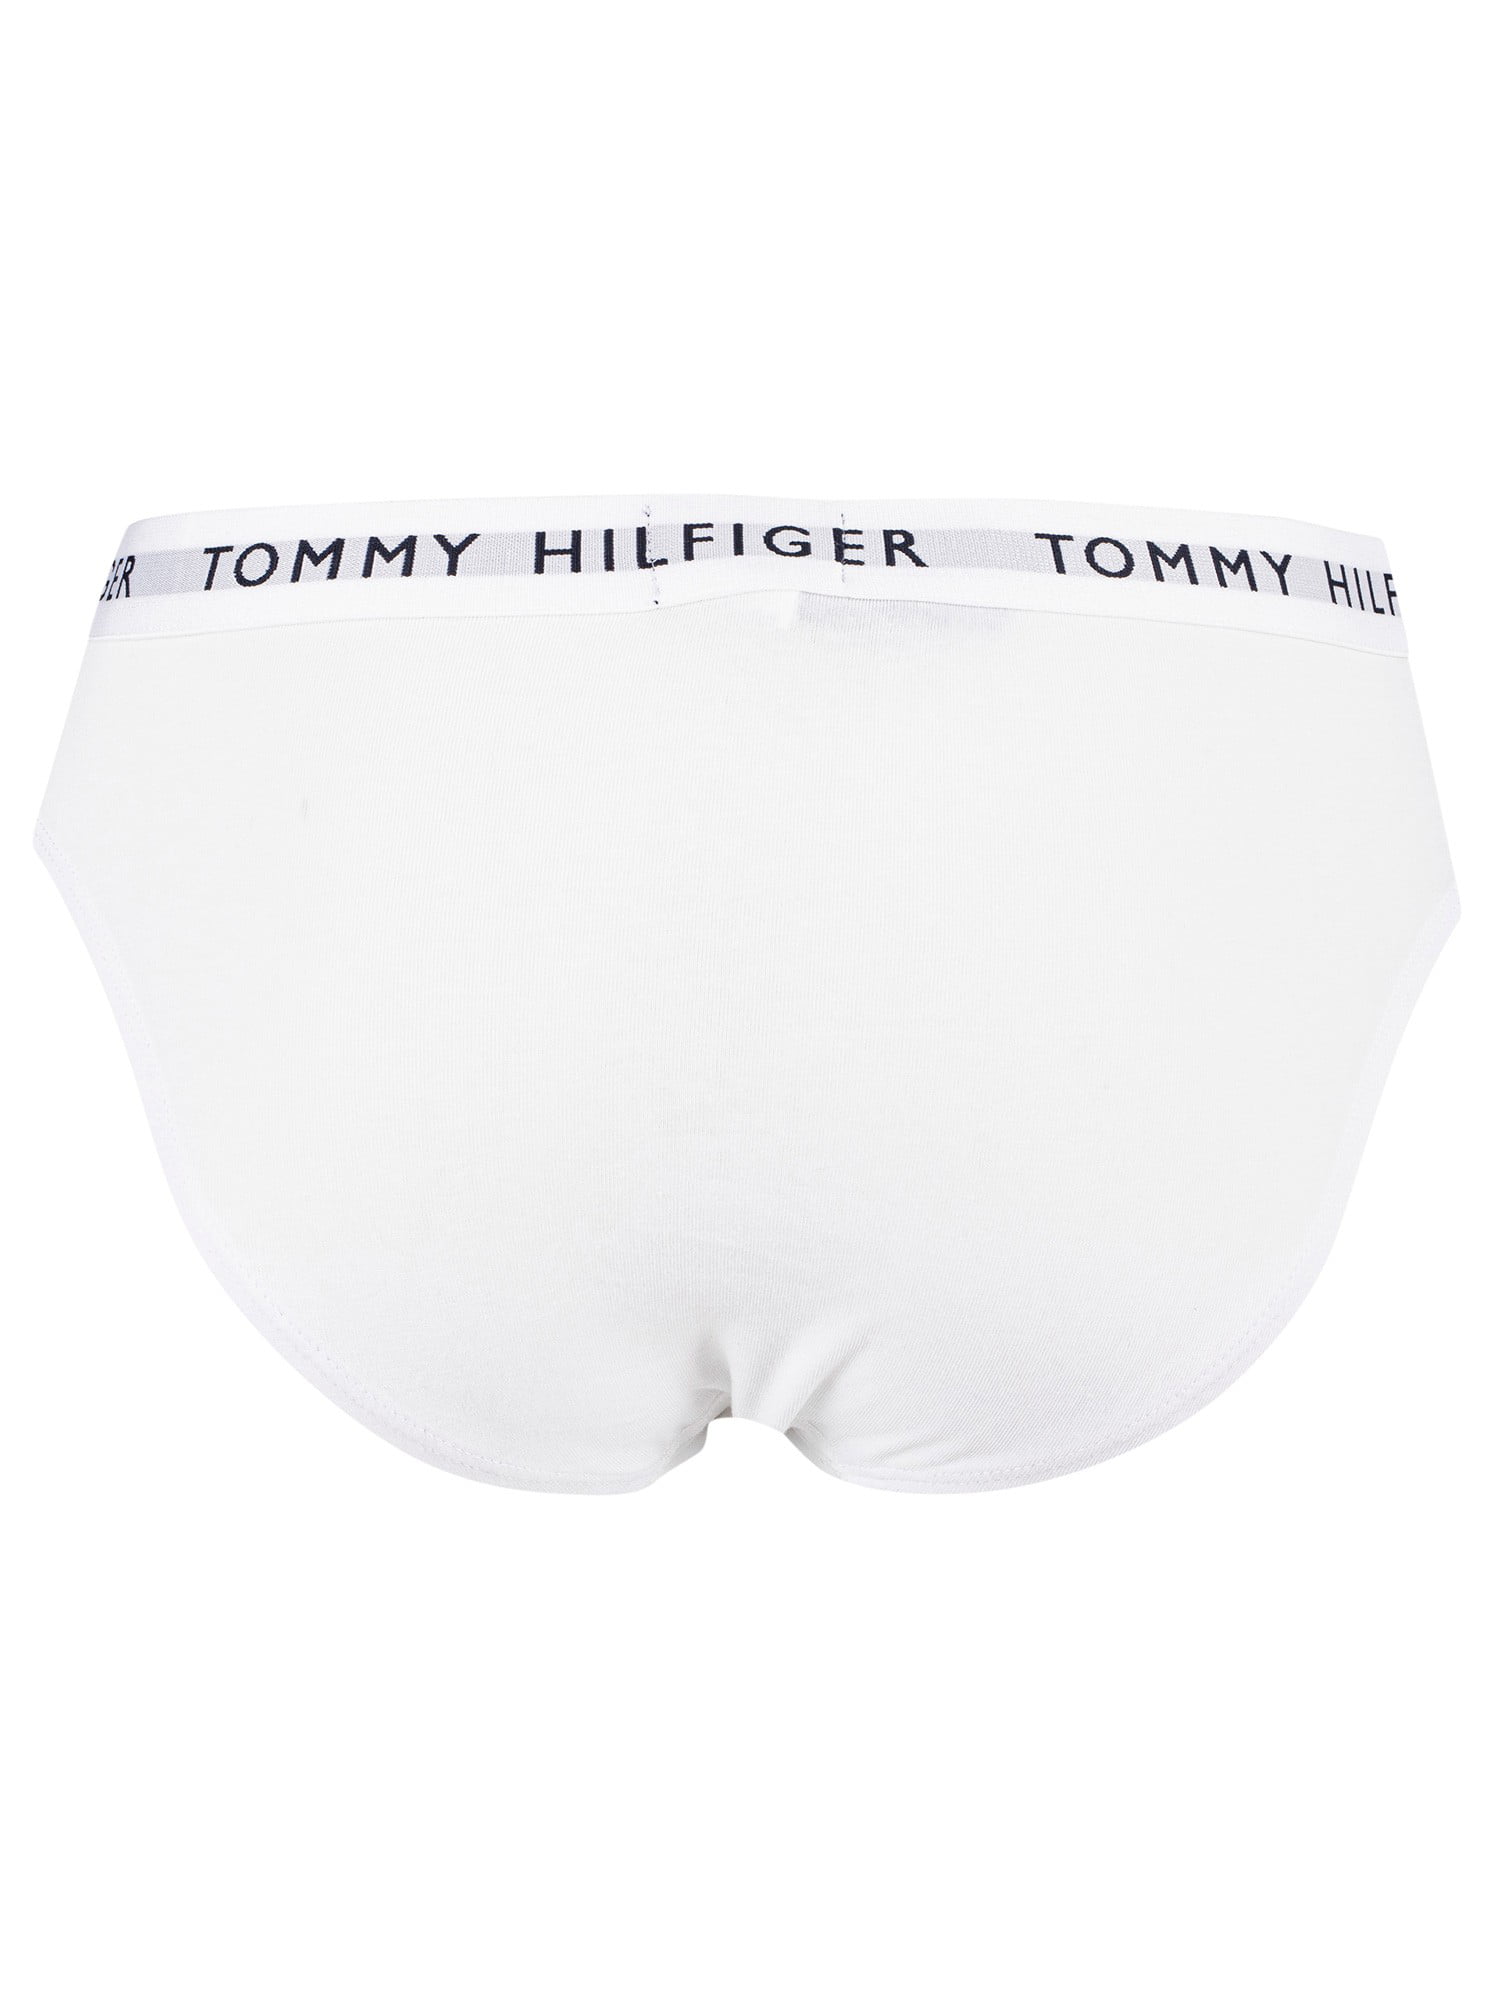 Tommy Hilfiger 3 Pack Briefs, Multicoloured 